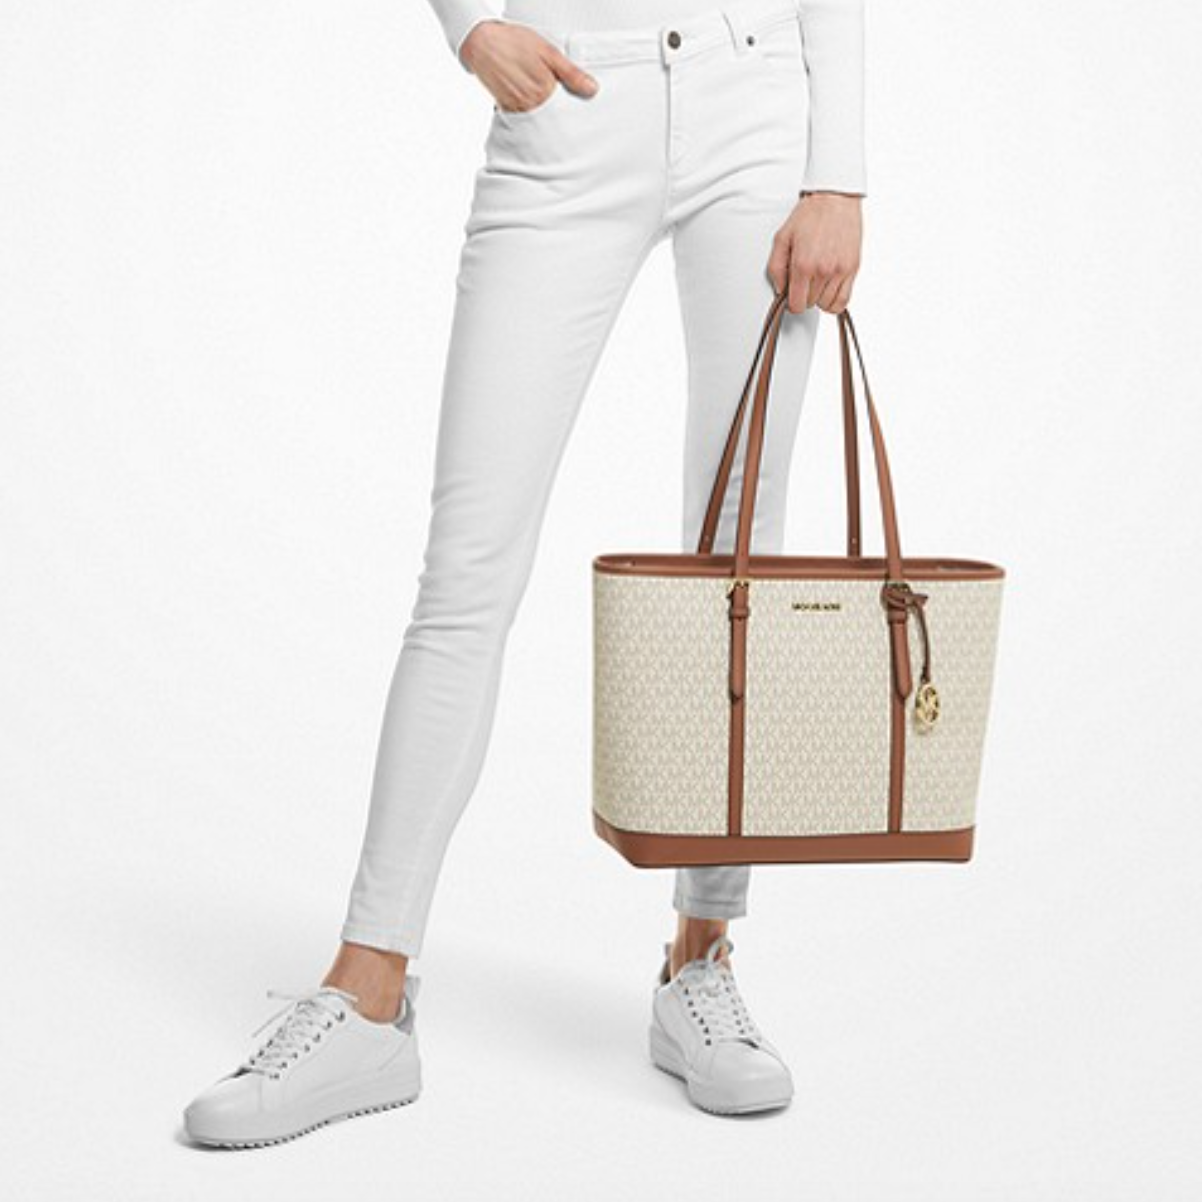 Michael Kors sale Take an extra 25 off purses totes and crossbodies